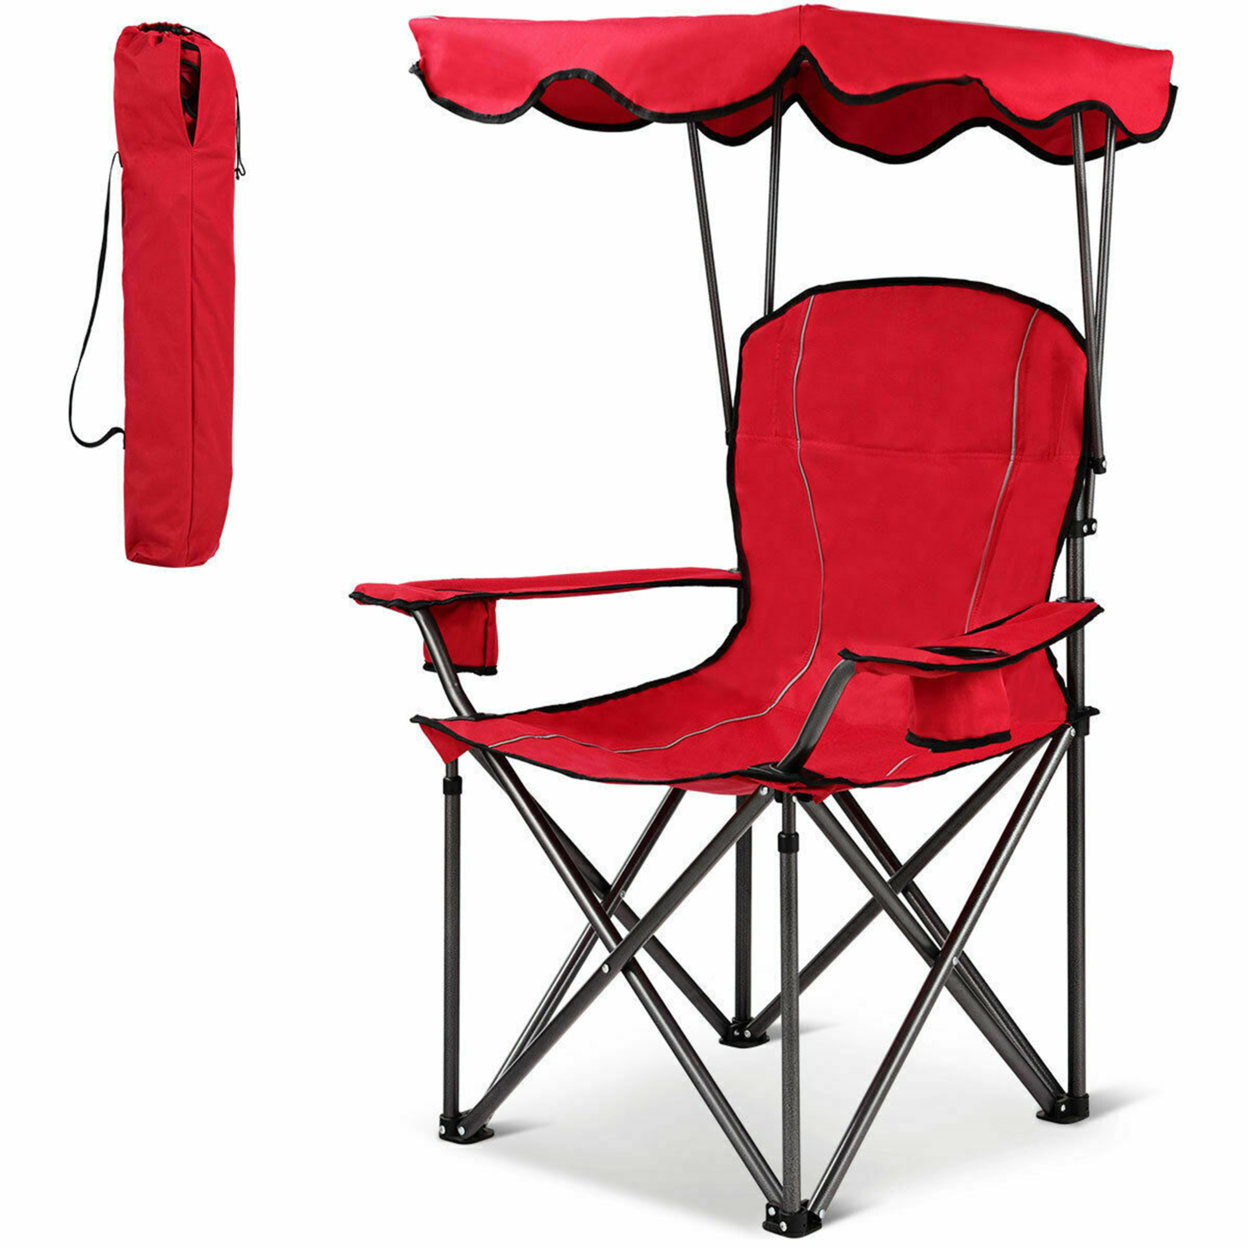 Folding Canopy Camping Chair Portable Beach Chair W/ Carrying Bag - Red